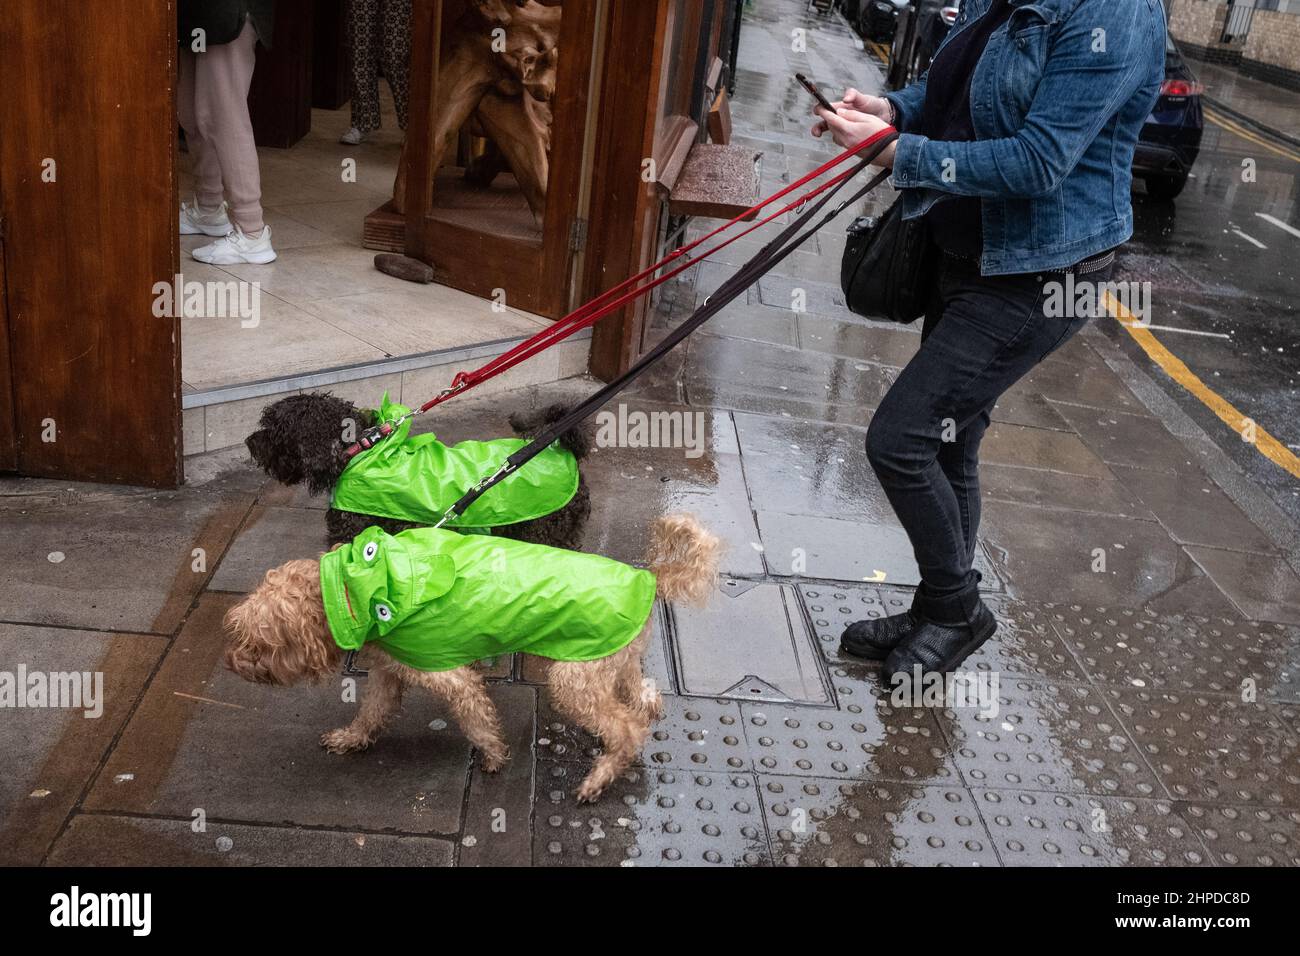 Two dogs in rain jackets being walked on a damp day in London, UK Stock Photo